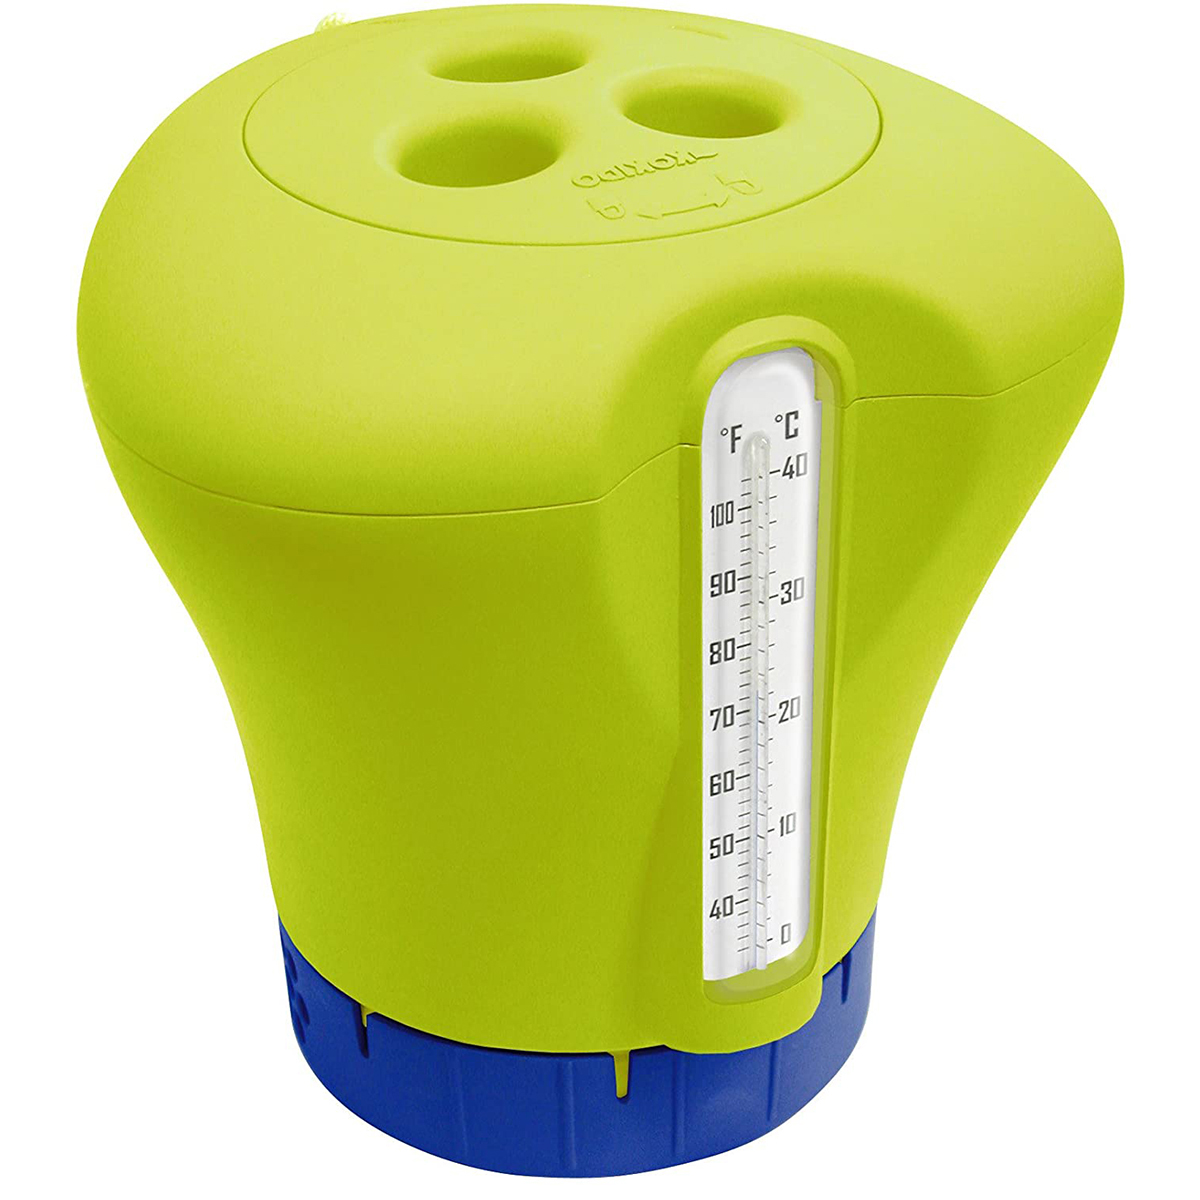 THERMO-KLOR DISPENSER/THERMOMETER